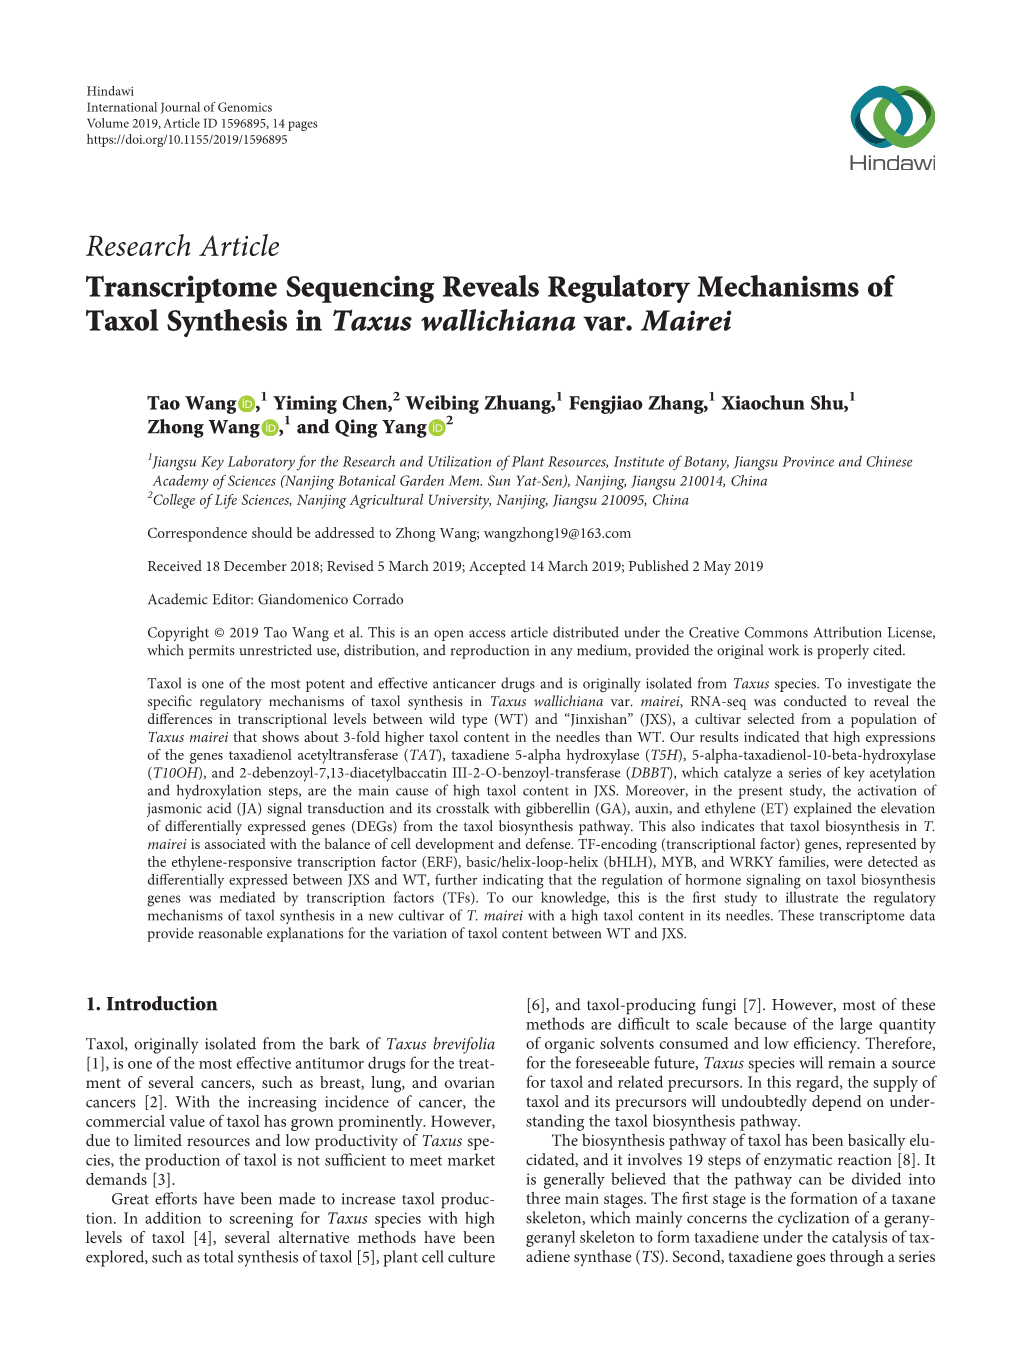 Research Article Transcriptome Sequencing Reveals Regulatory Mechanisms of Taxol Synthesis in Taxus Wallichiana Var